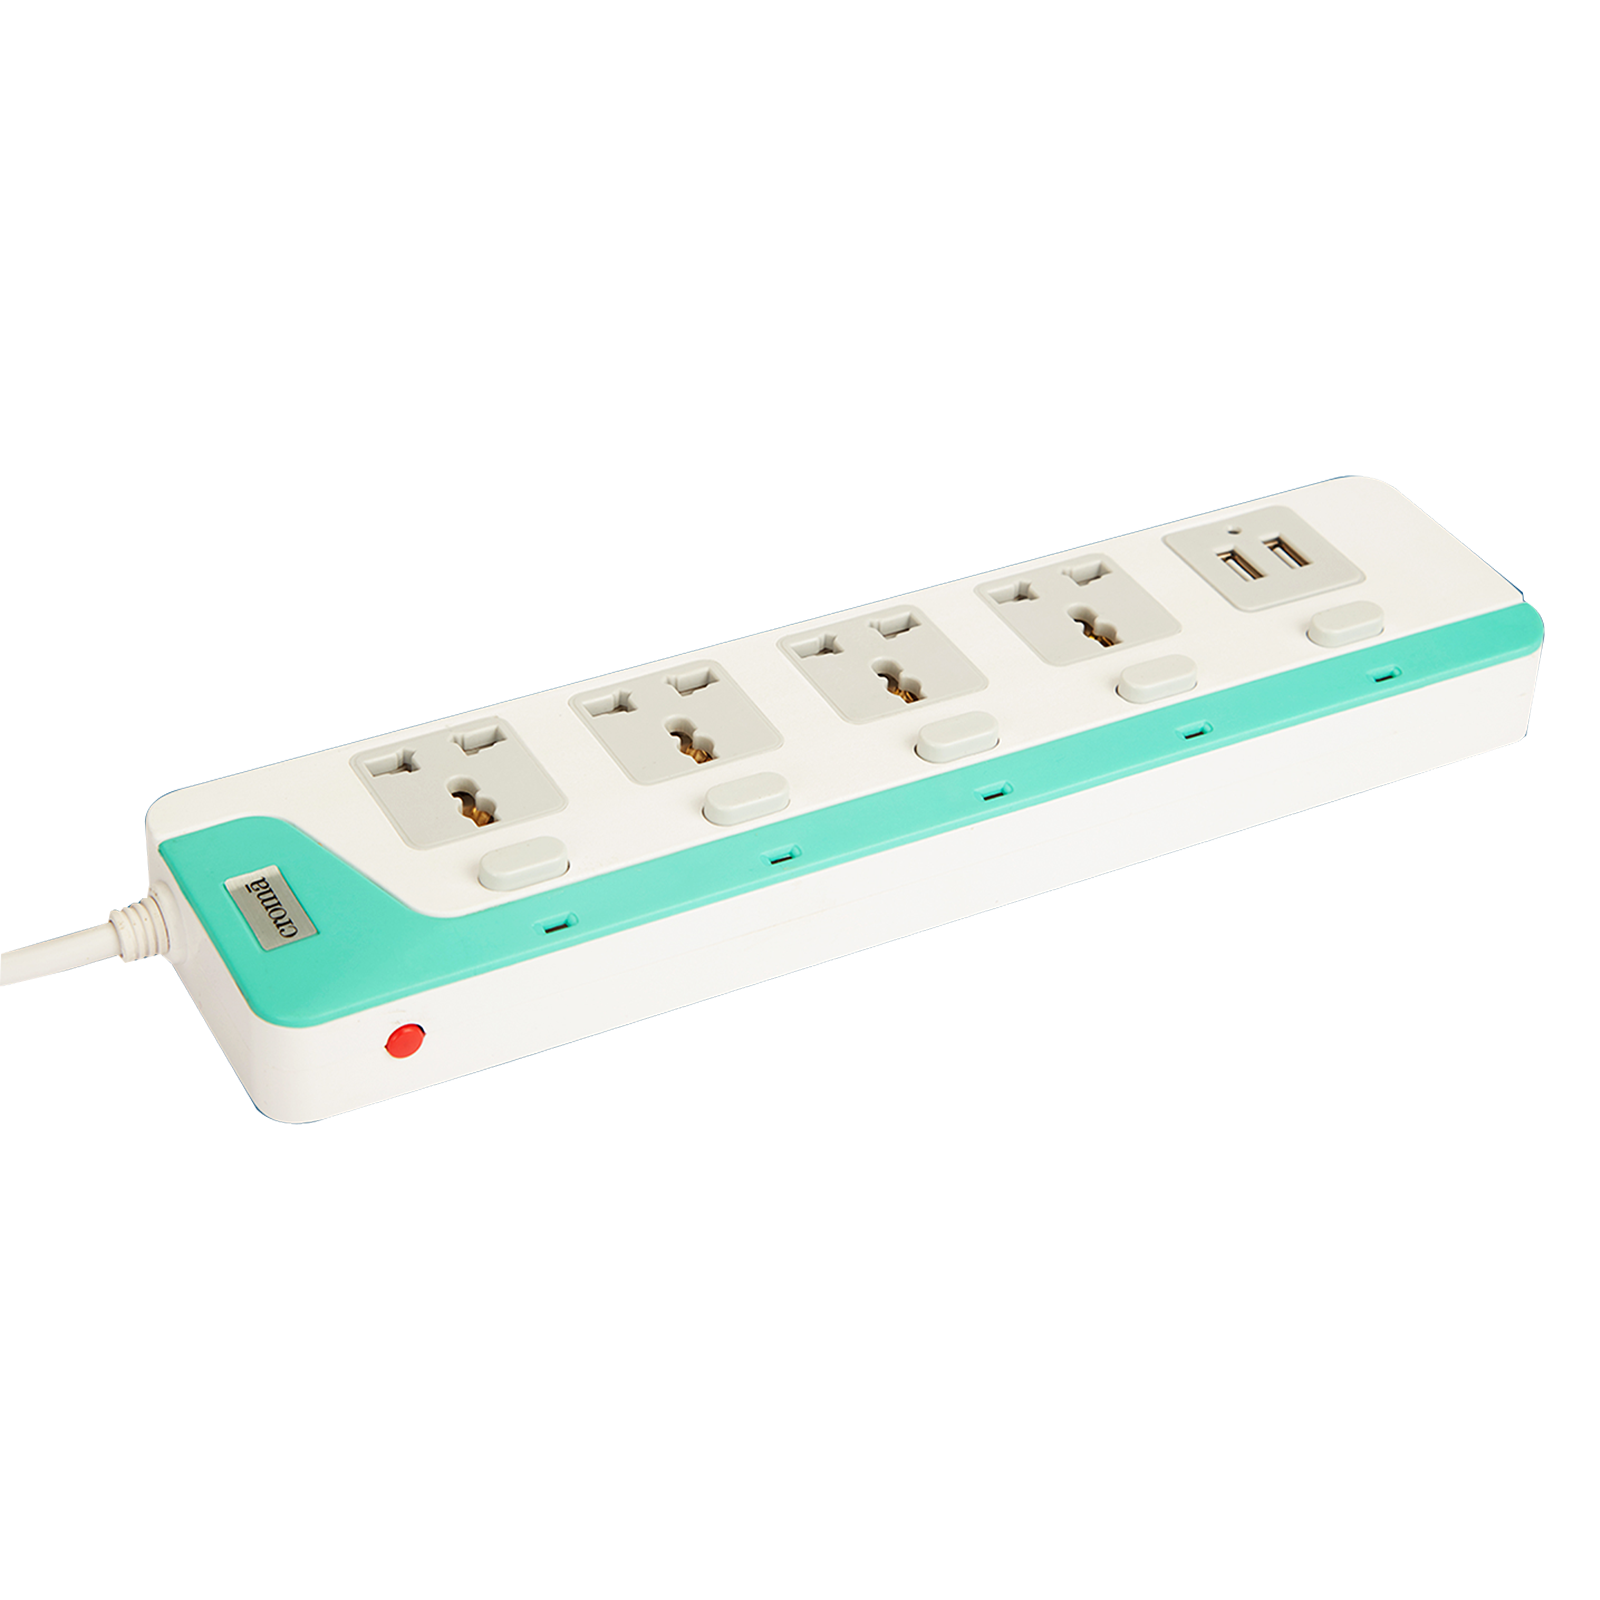 Croma 6 Amps 4 Sockets Surge Protector WIth Individual Switch (2 Meters, Child Safety Shutter, CRCP1001, Blue)